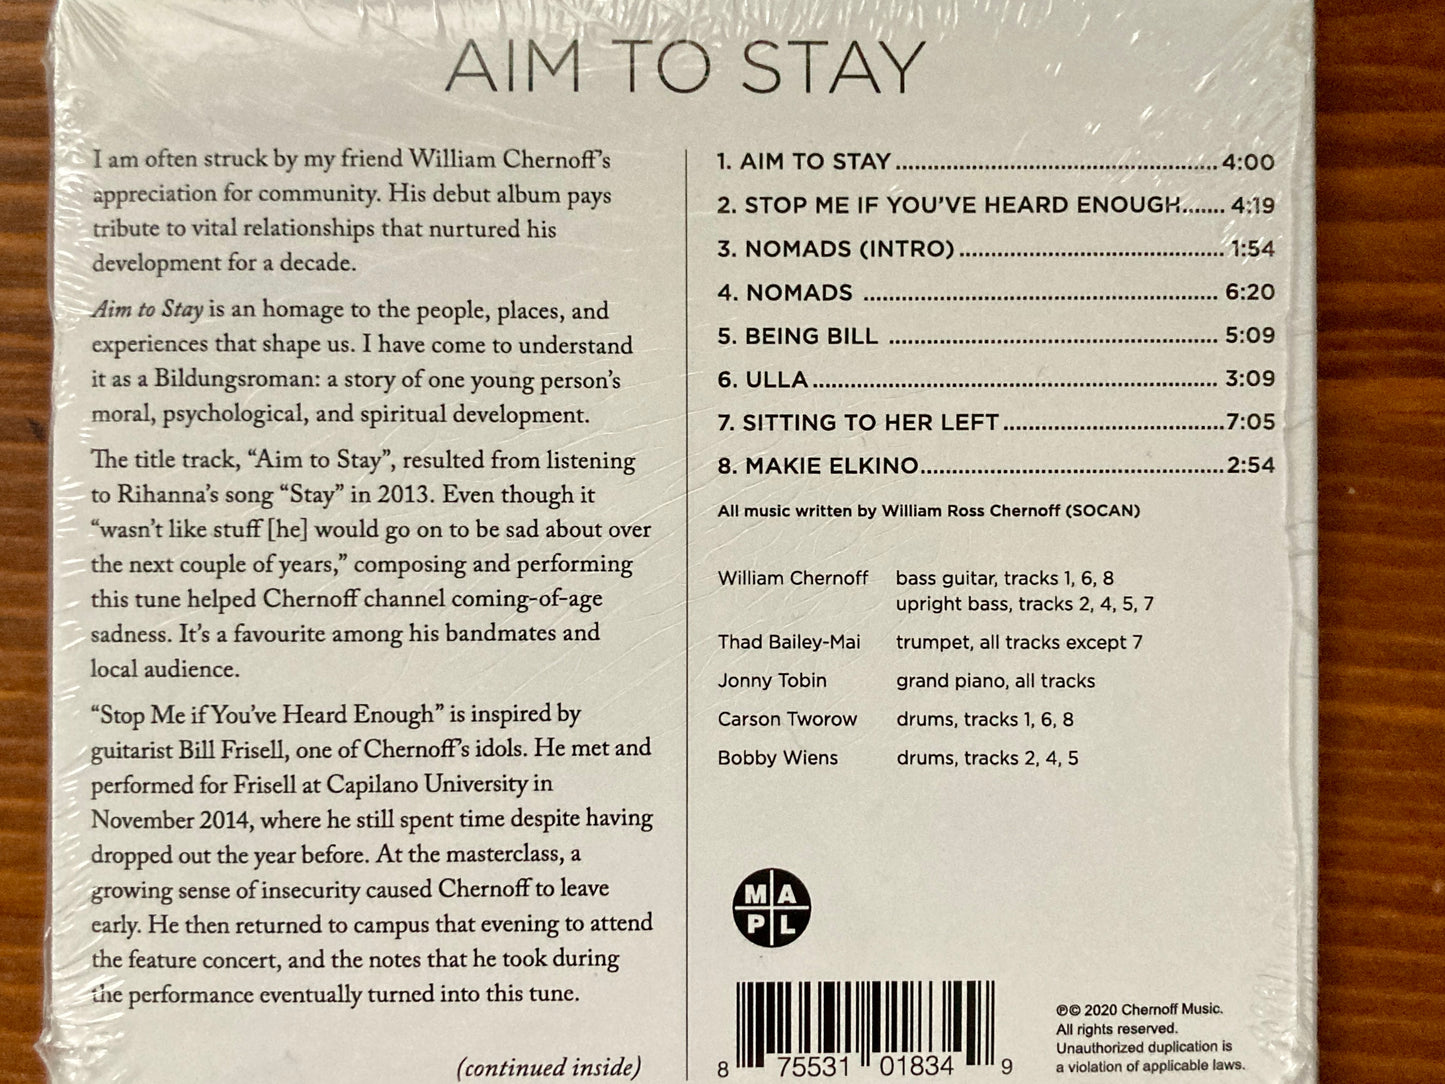 William Chernoff: Aim to Stay back of CD packaging